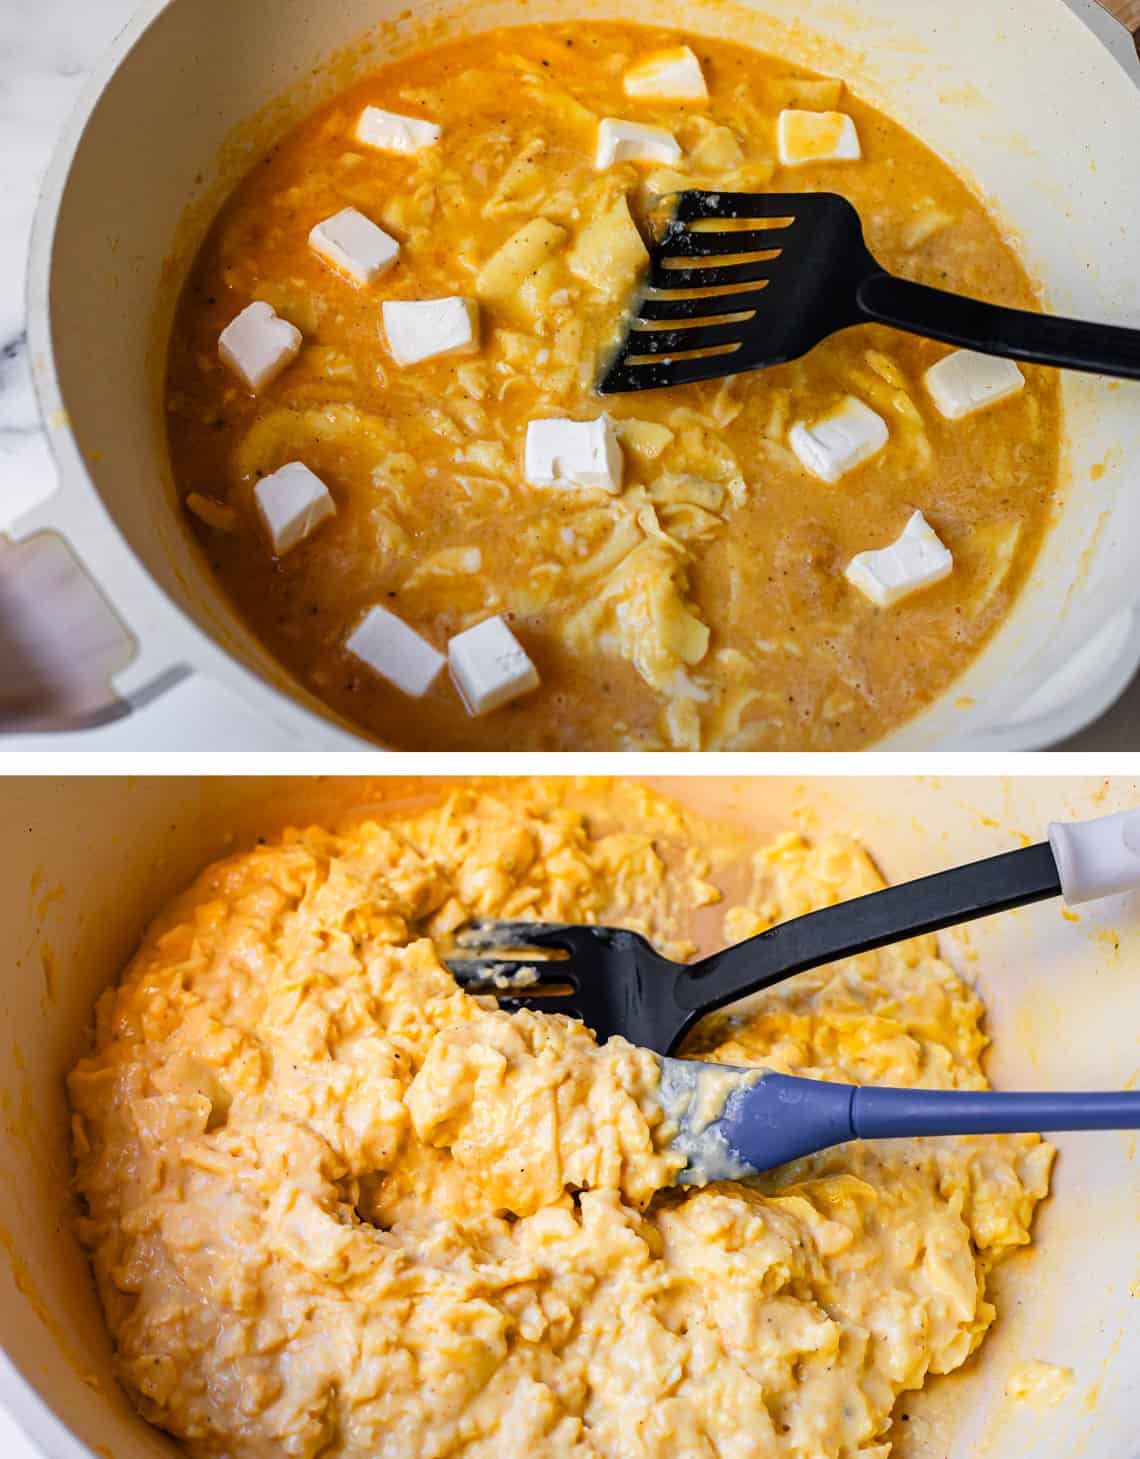 Scrambled eggs being cooked with chunks of cream cheese added in and cooked eggs after being fully cooked.